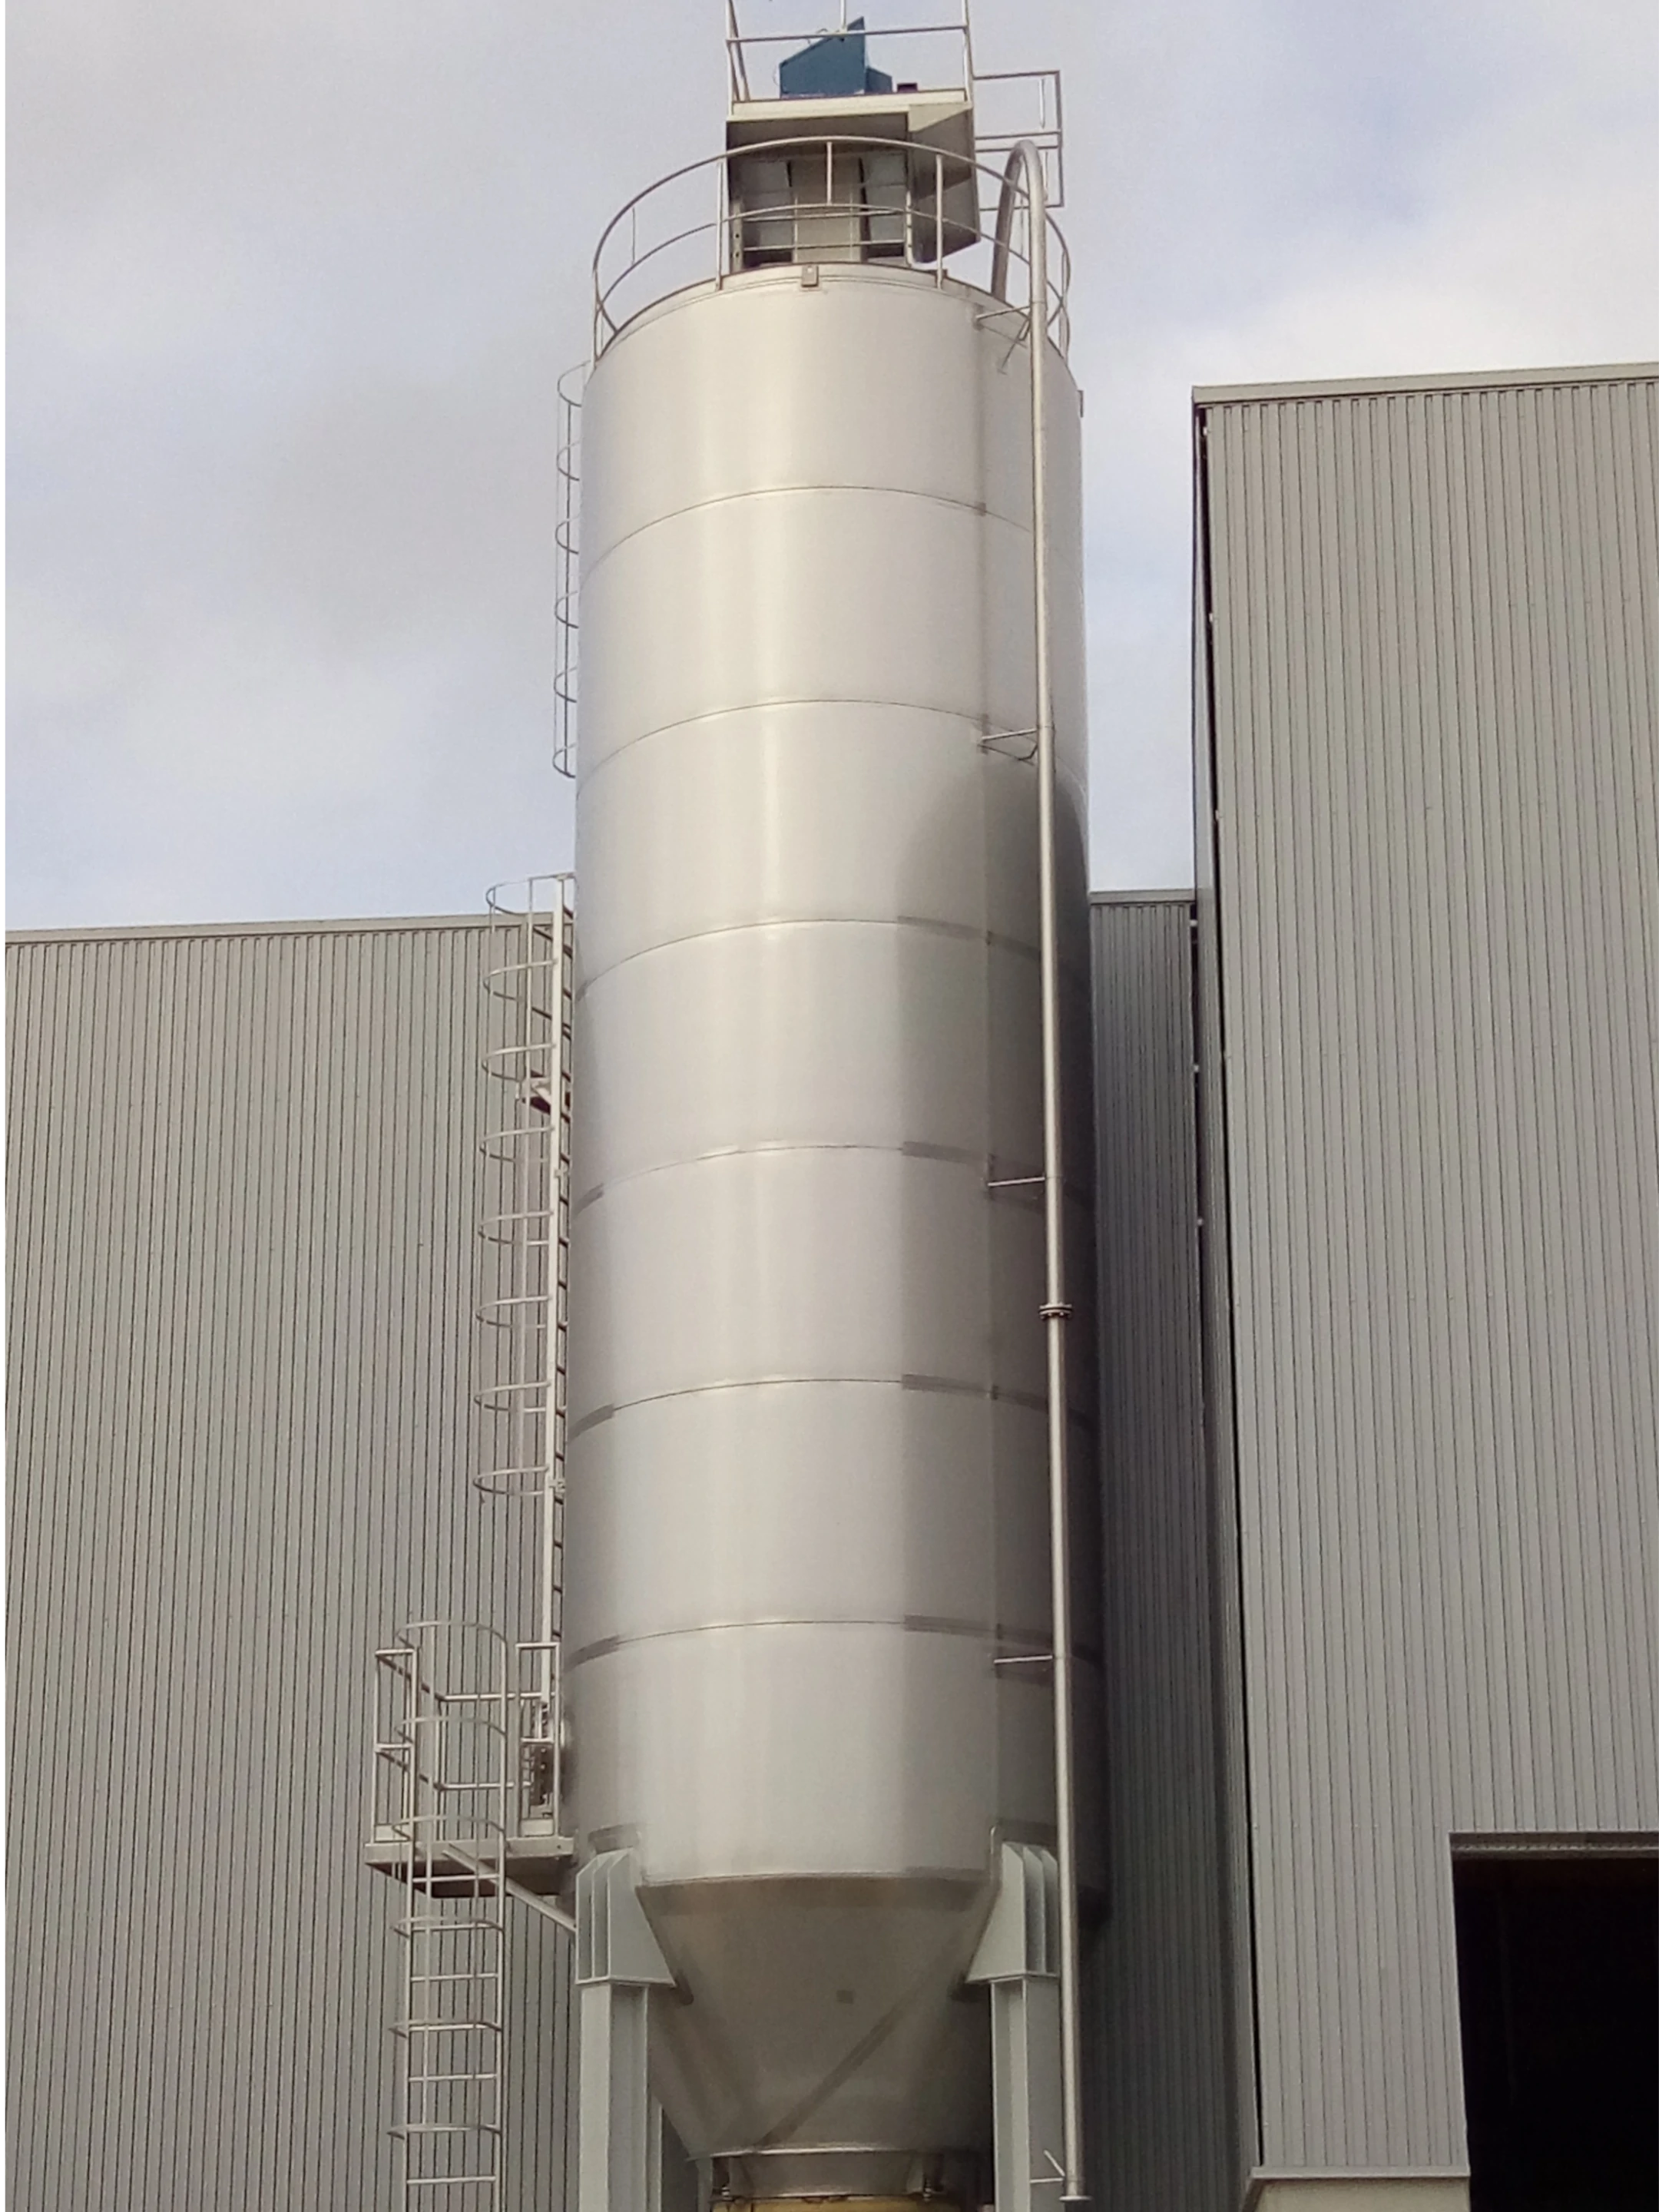 BTL Silo in stainless steel - Chemical Industry